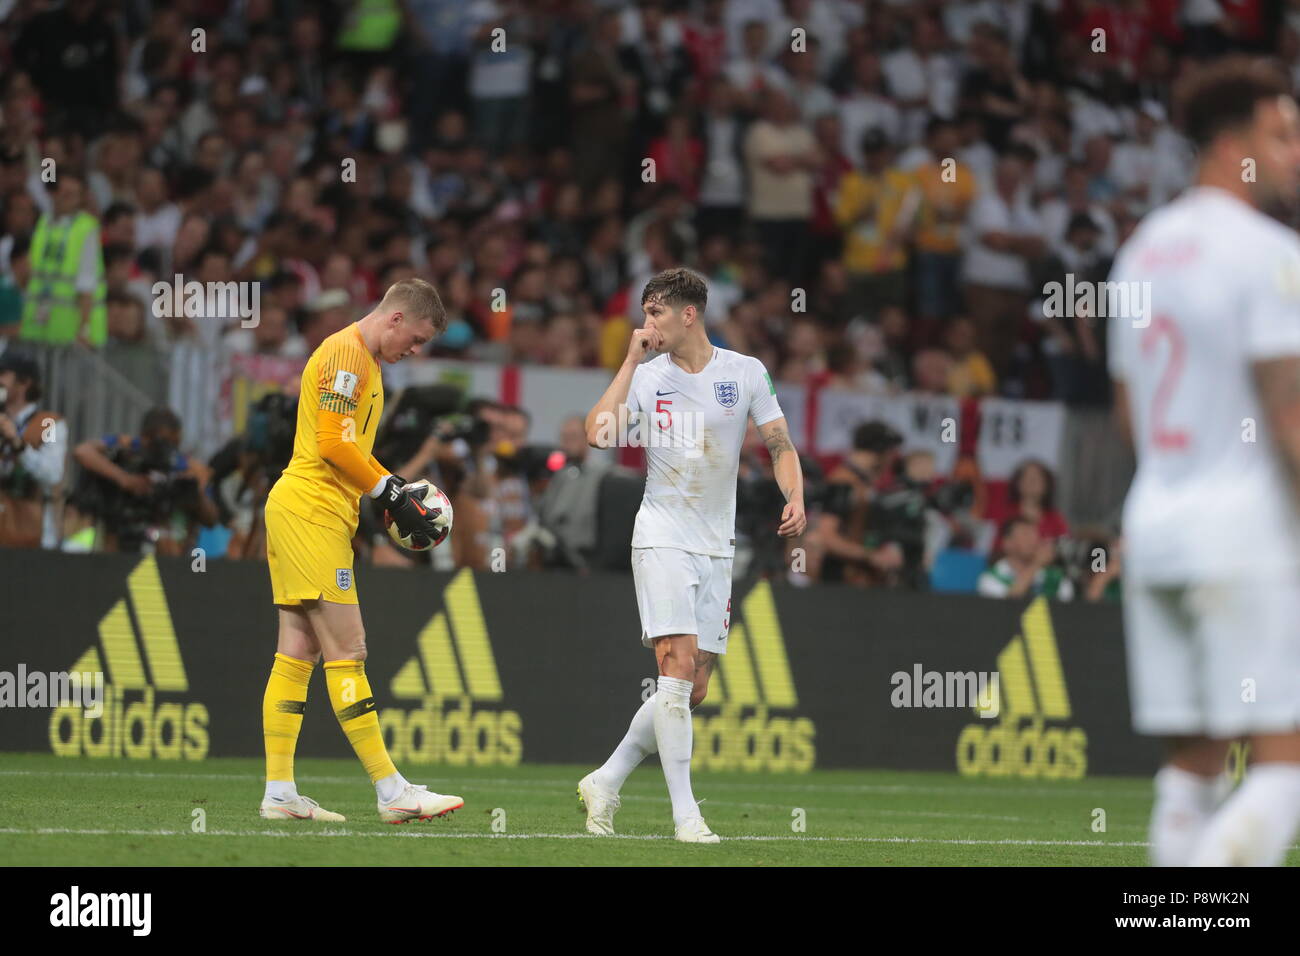 FIFA World Cup Russia 2018. Semifinals. Croatia vs England at Luzniki Stadium. English goalkeeper Jordan Pickford (left) and John Stones (right) during the match. July 11, 2018. Russia, Moscow. Photo credit: Vasily Ponomorev/Kommersant Stock Photo